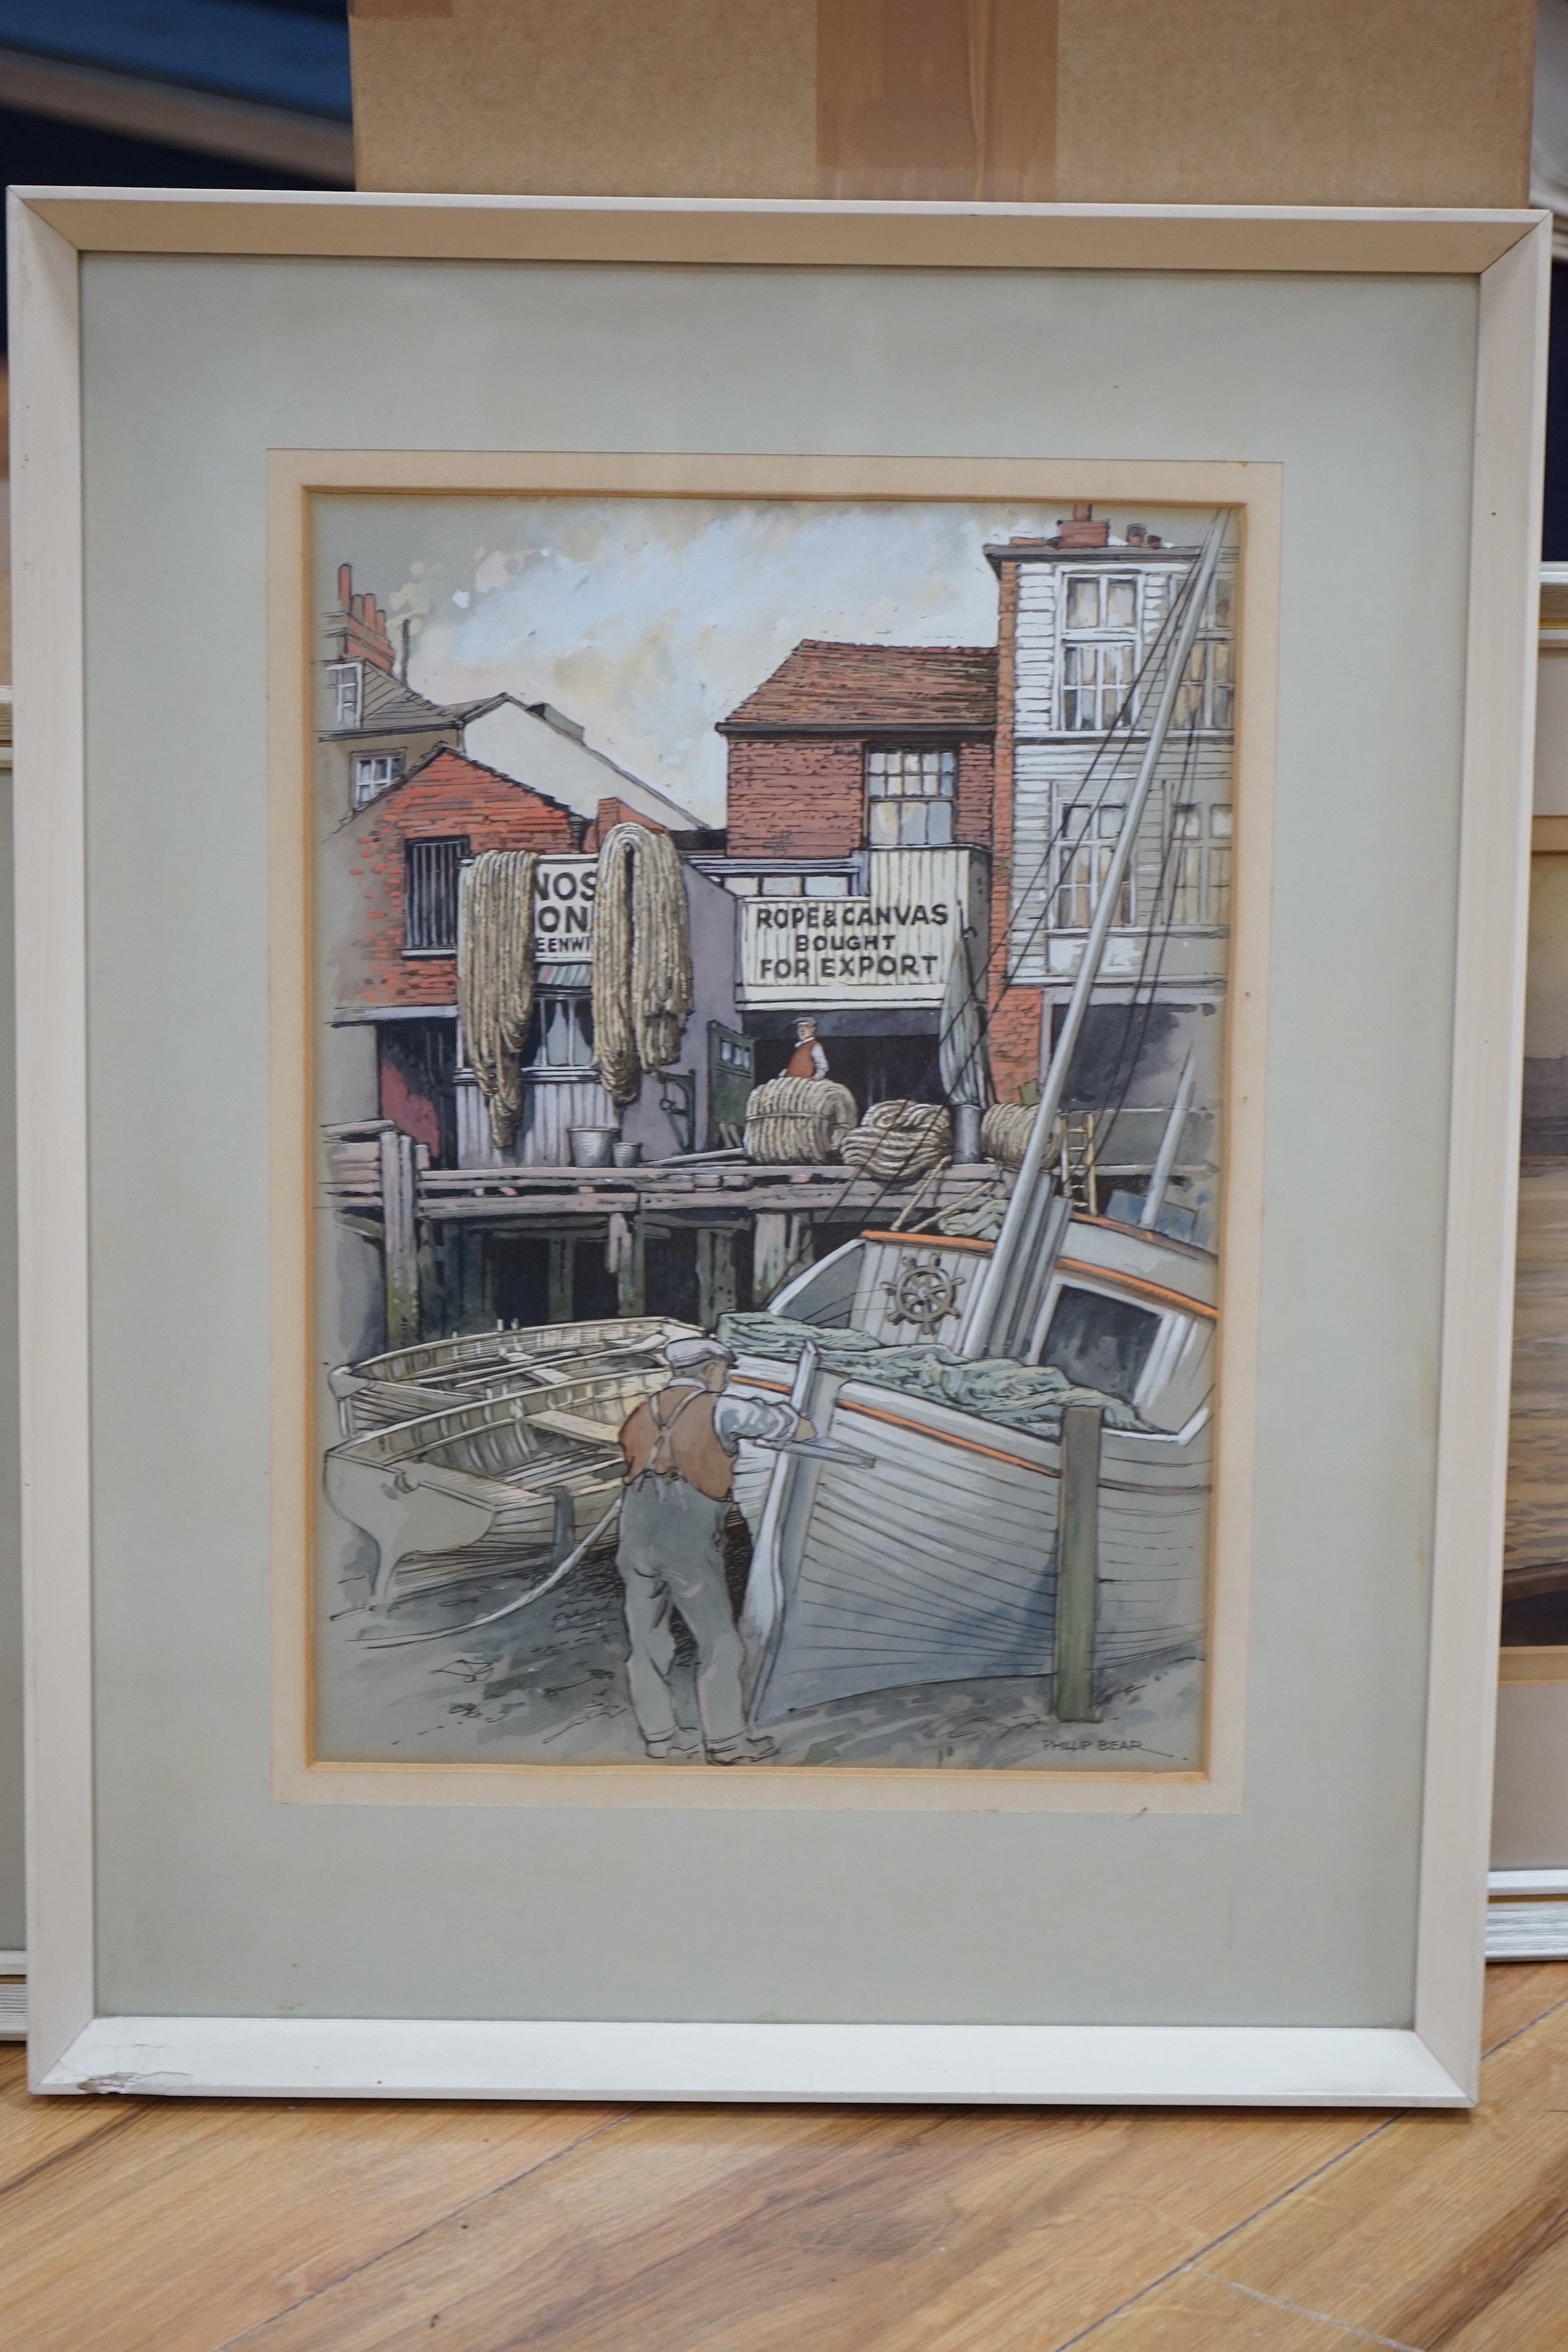 Philip Bear (b.1932), three watercolours, 'Dredging', 'Greenwich Riverside' and 'Shipping in harbour', signed, largest 23 x 40cm